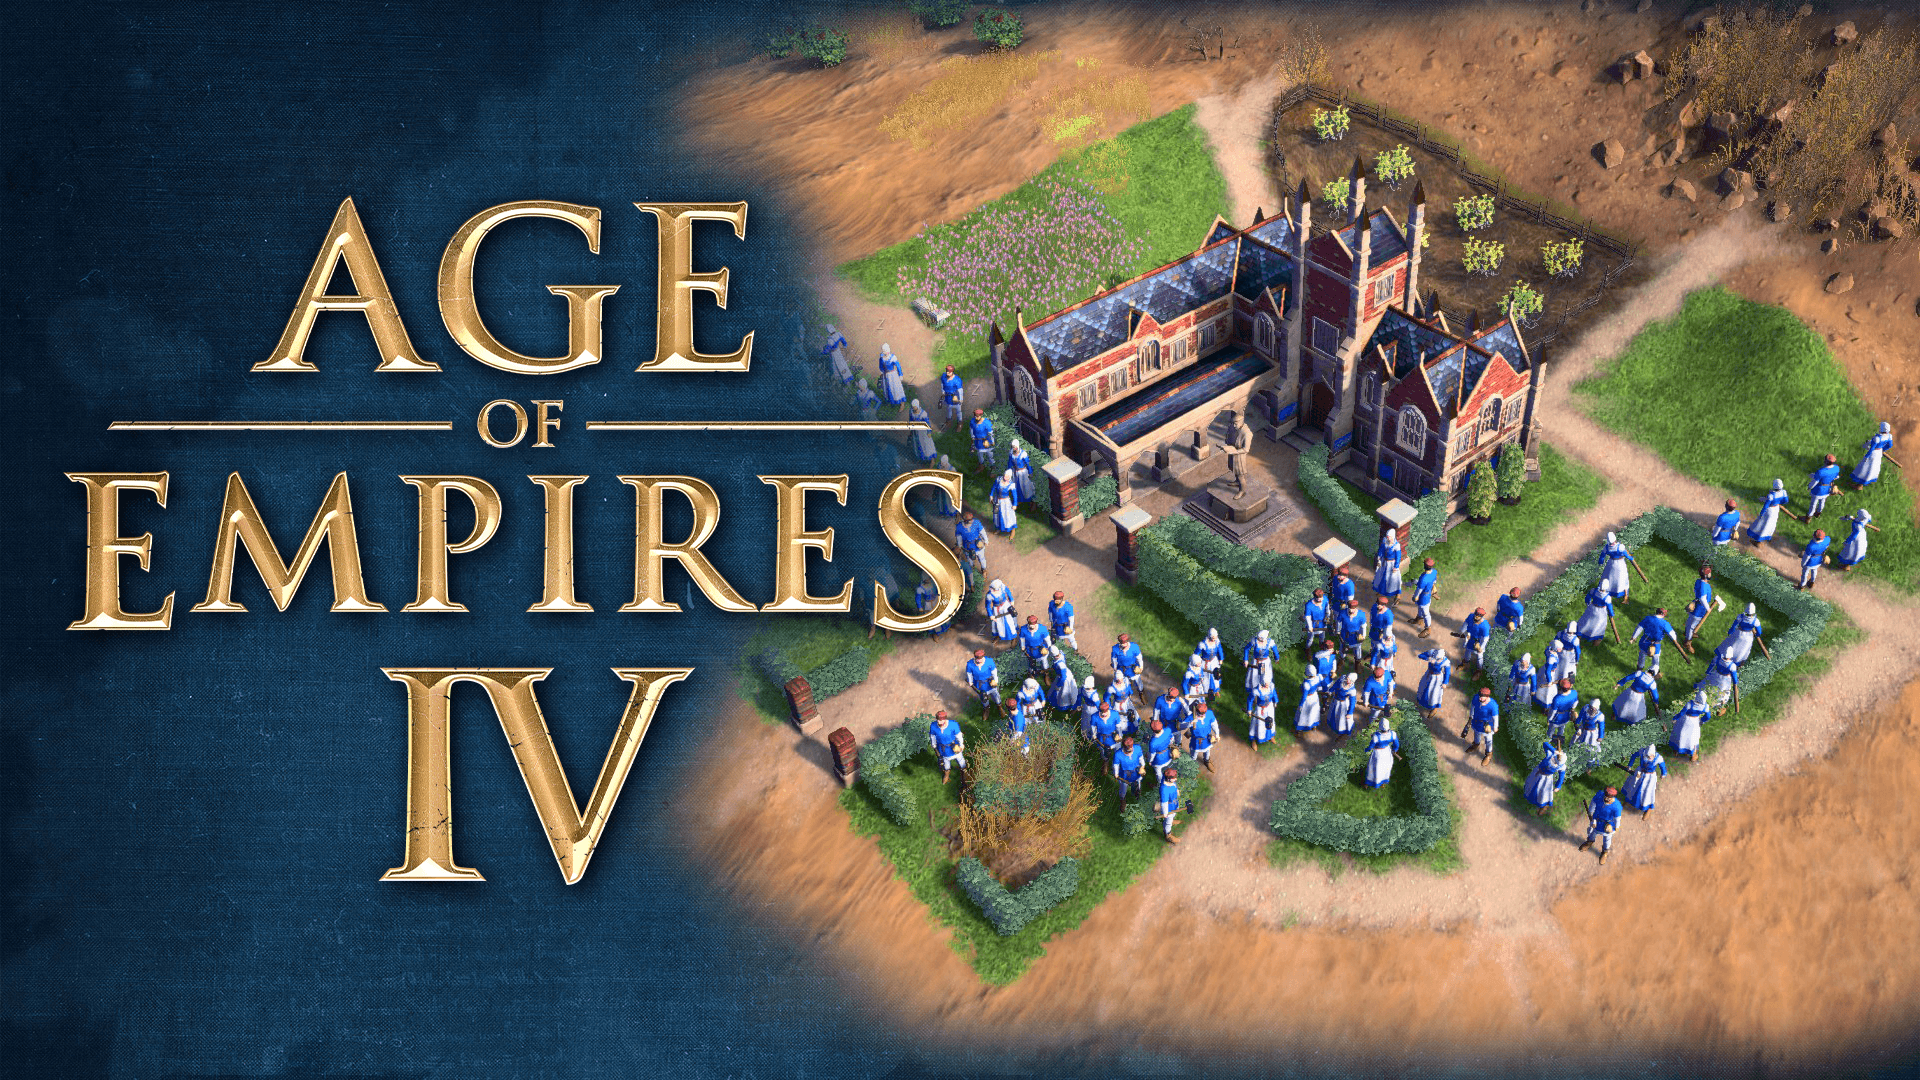 Age of Empires IV Players Eligible for UArizona Credit Through History